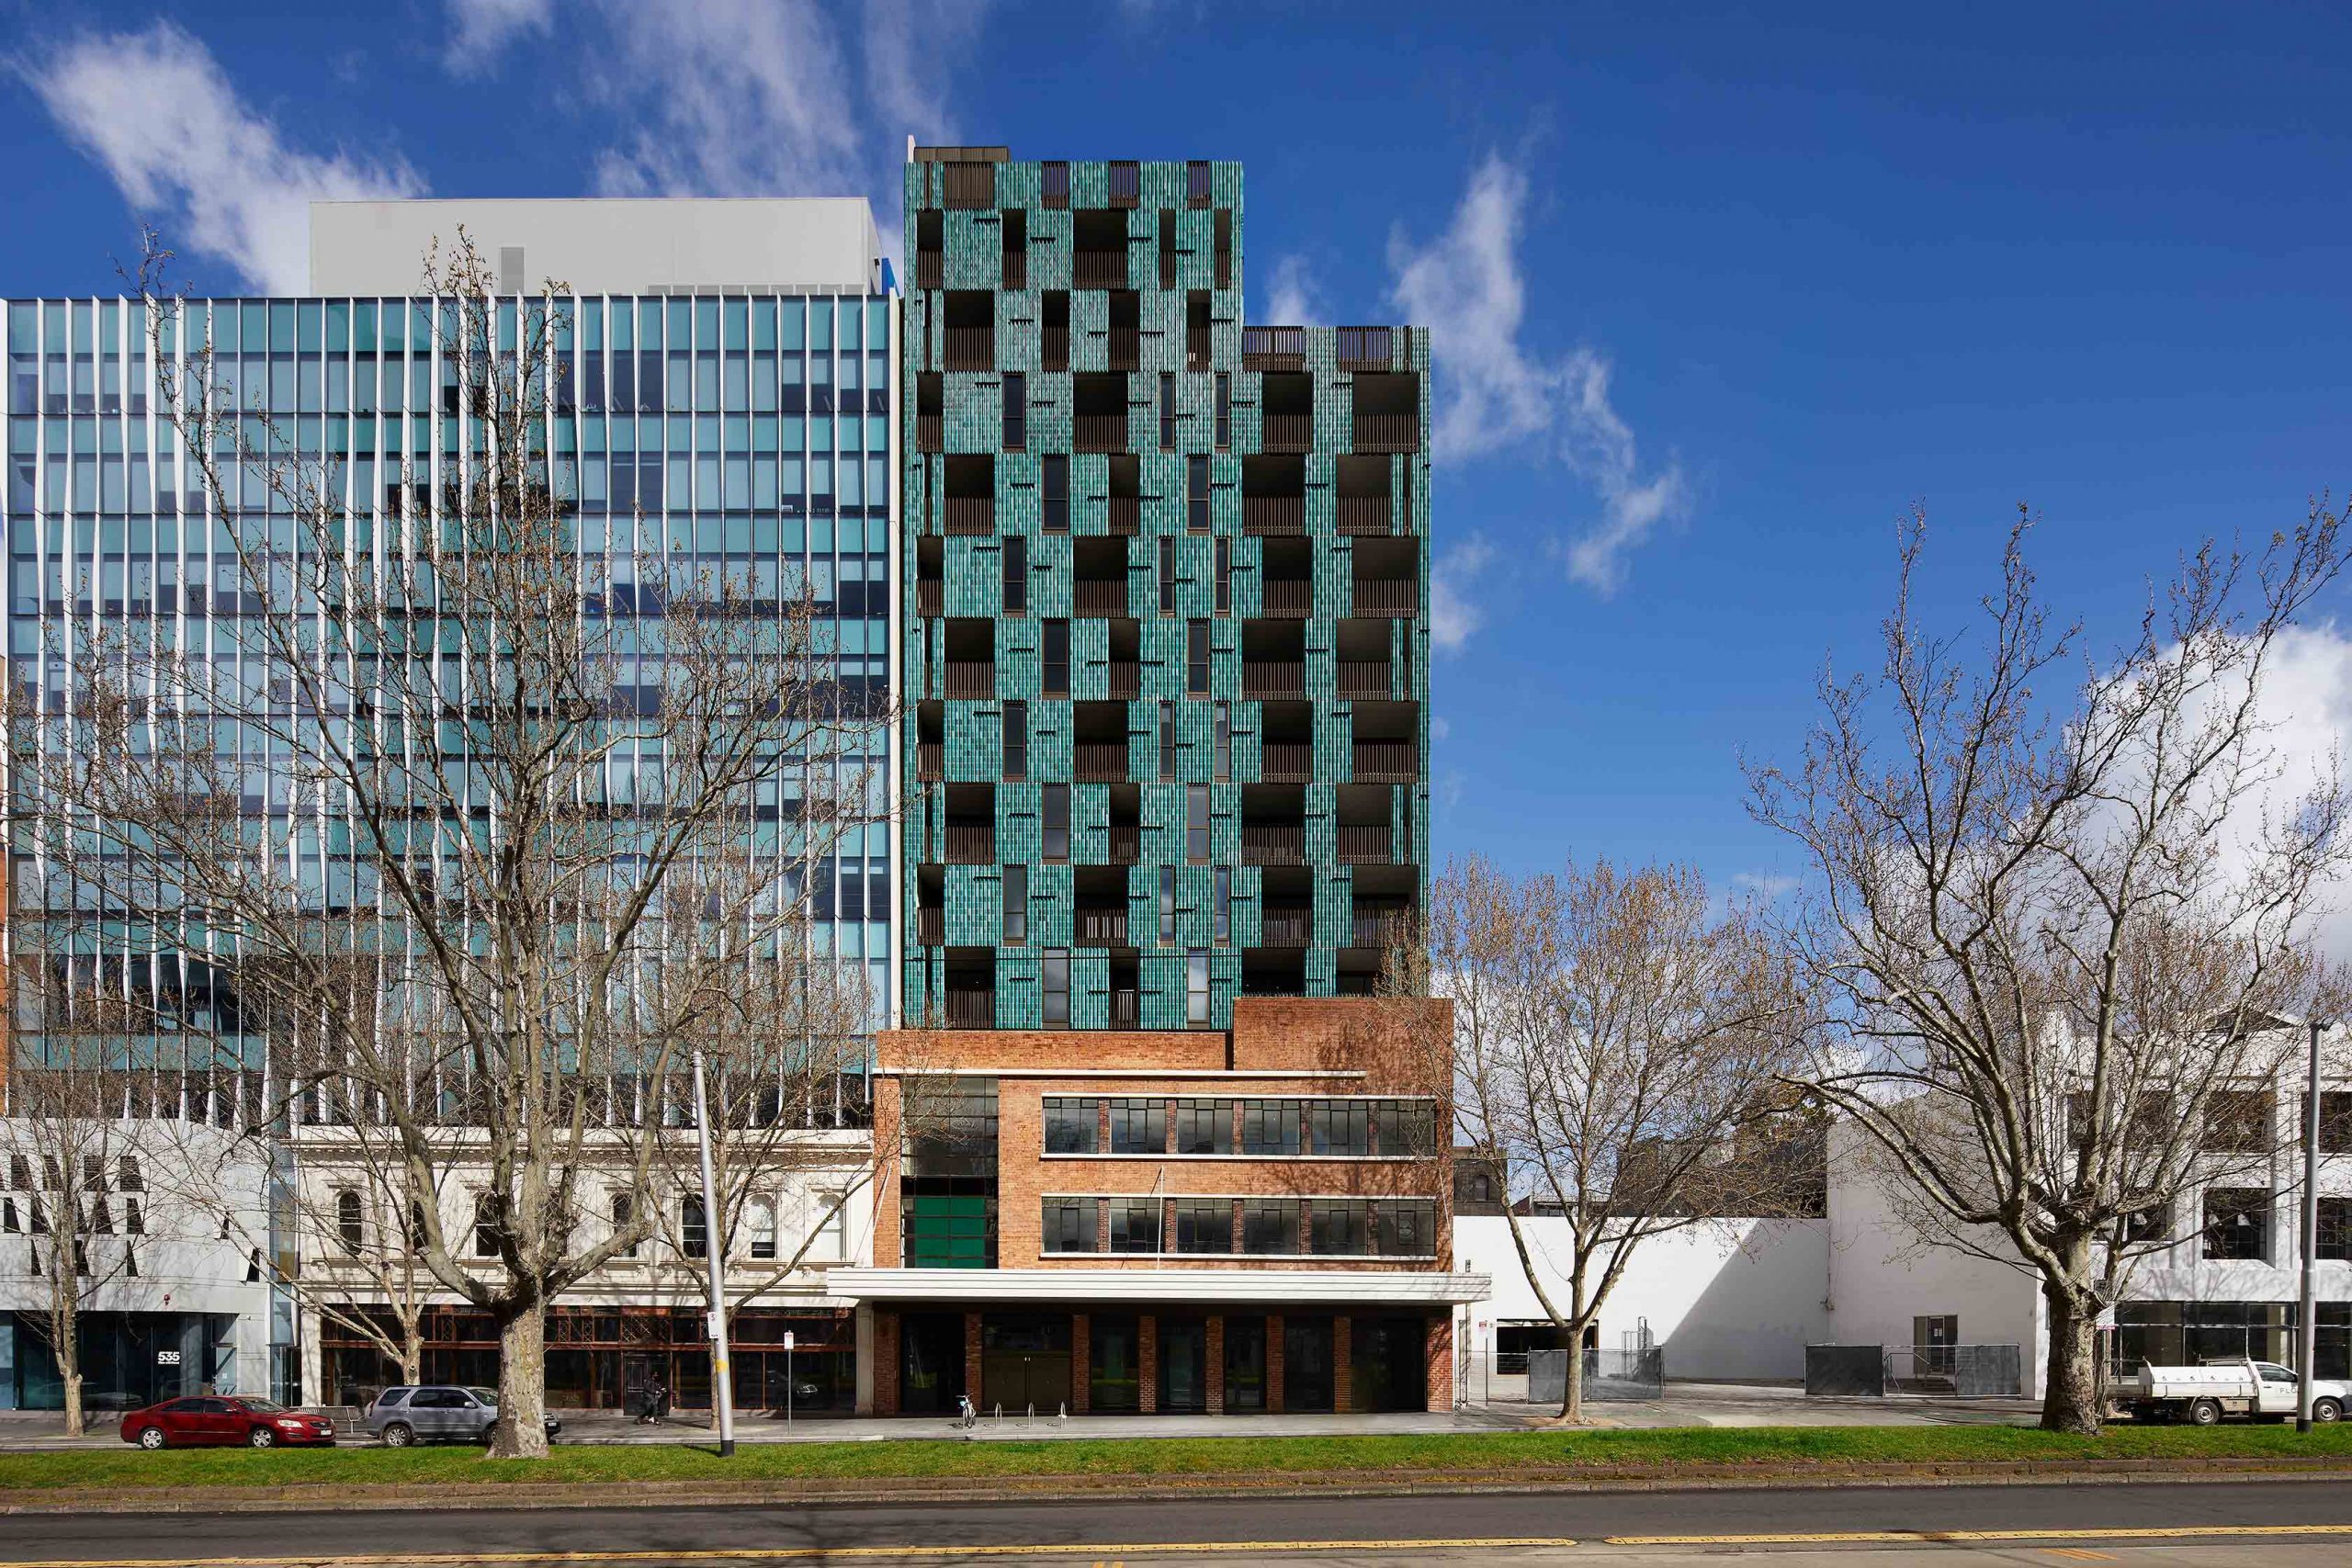 A modern apartment complex with striking architectural features in Melbourne.